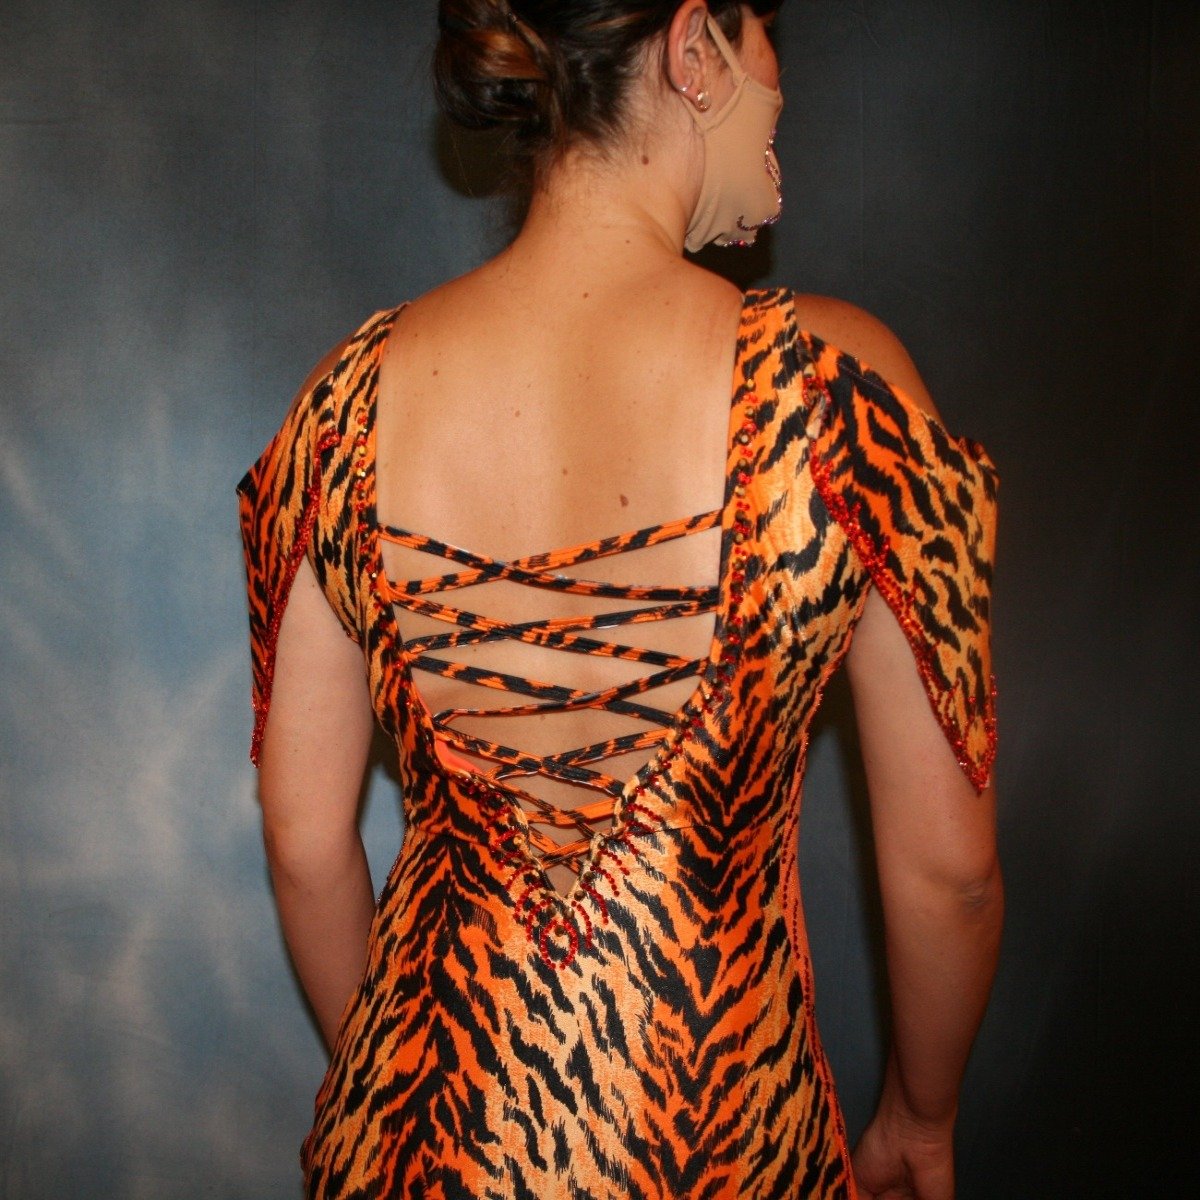 Crystal's Creations close up back view of Tiger print & orange Latin/rhythm dress created of tiger print lycra & luxurious orange solid slinky has color blocking, lattice work detailing in front bodice, split sides & low back, as well as intriguing longer back skirting, adorned with orange chandelle feathers, also features detailed Swarovski rhinestone work!